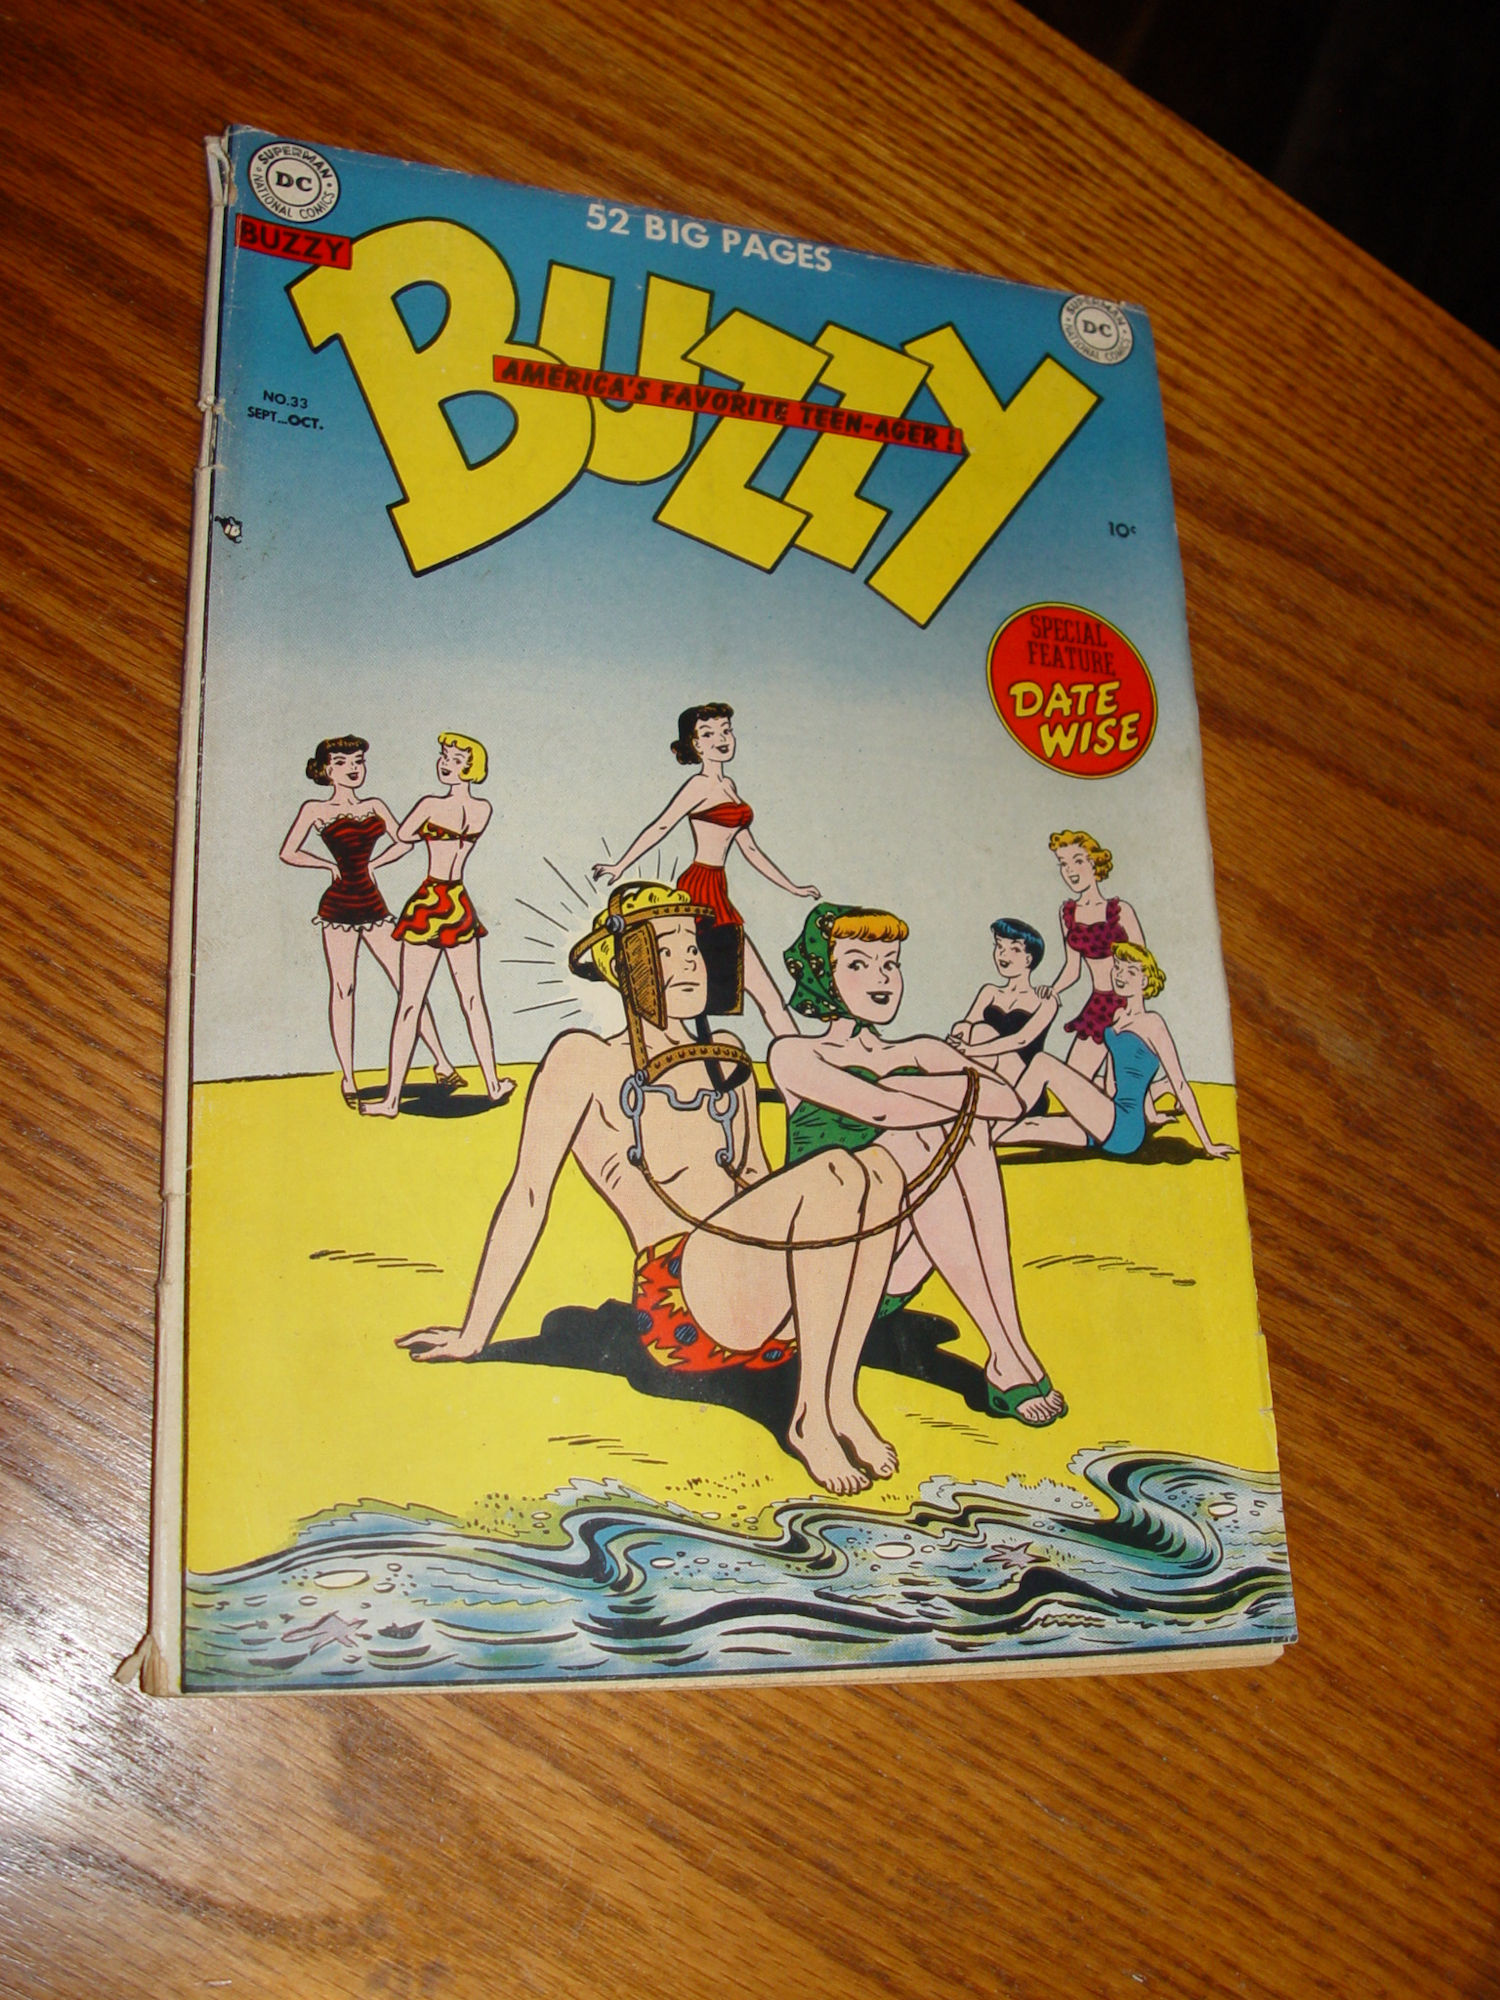 DC Comic Buzzy #33 September, 1950 -
                        America's Favorite Teen-Ager!